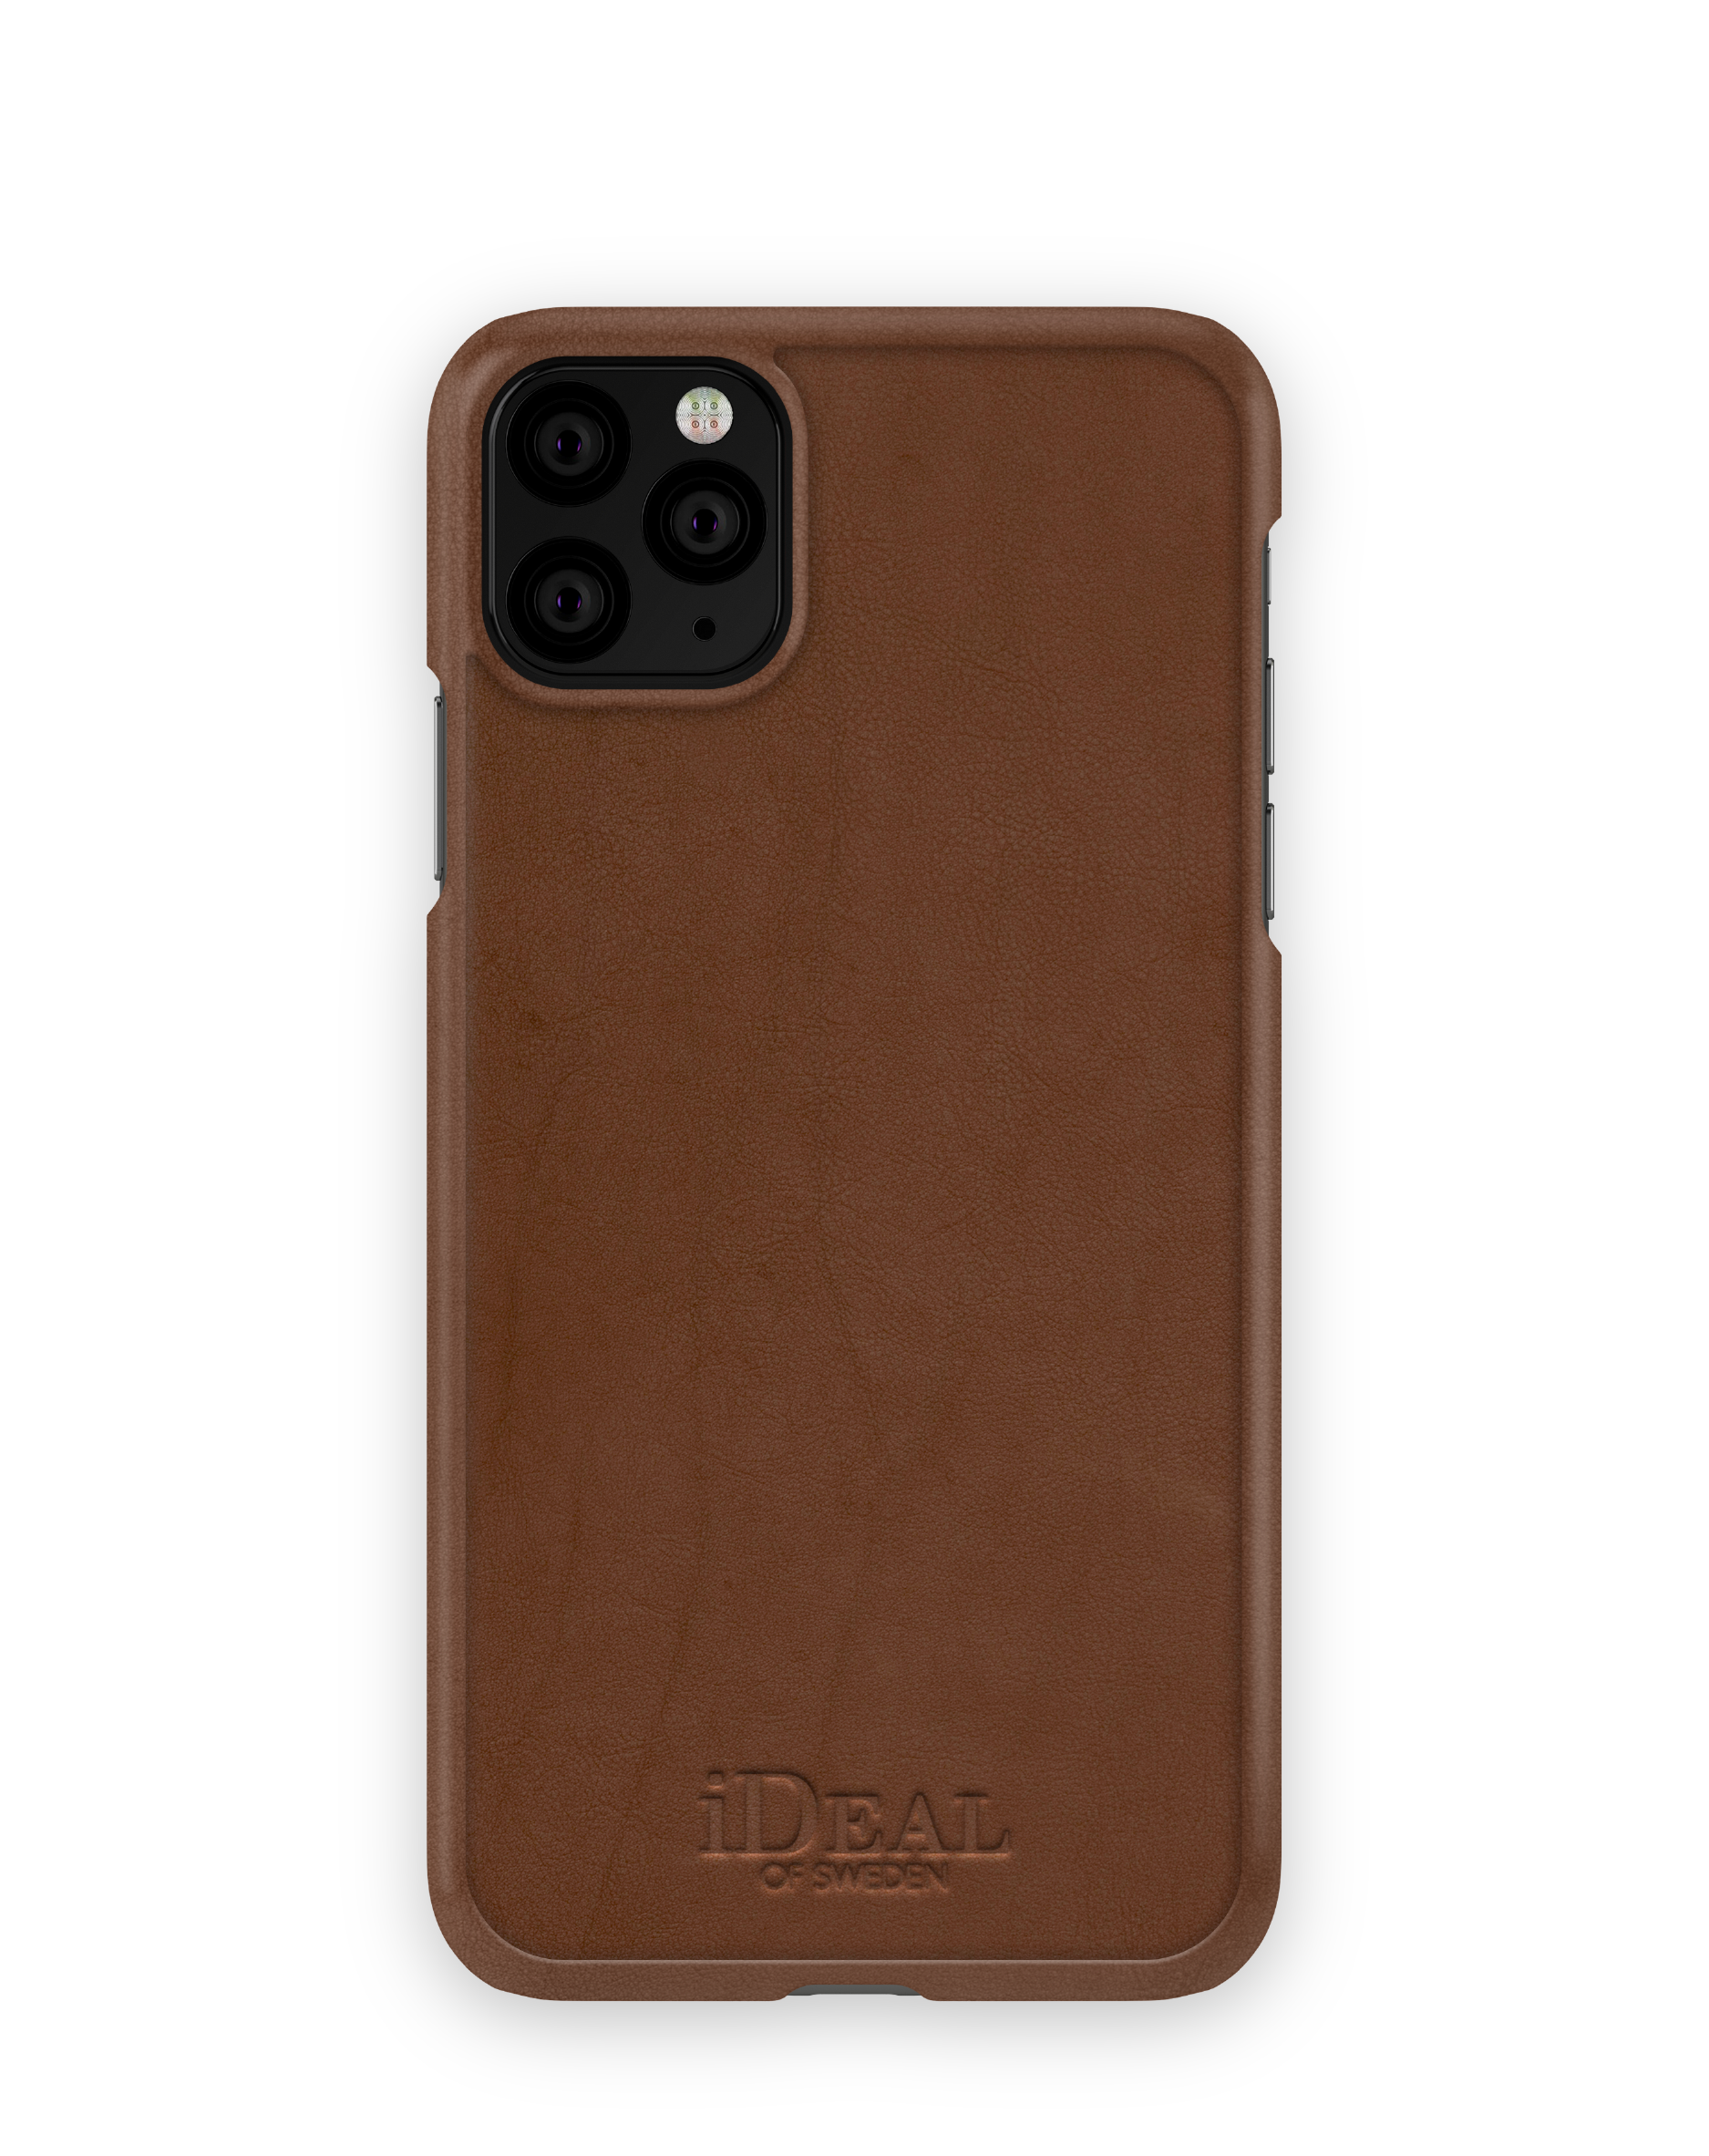 Max, 11 OF Pro IDFC-I1965-COM-03, IDEAL Apple, iPhone SWEDEN iPhone Brown Apple Apple Max, XS Backcover,